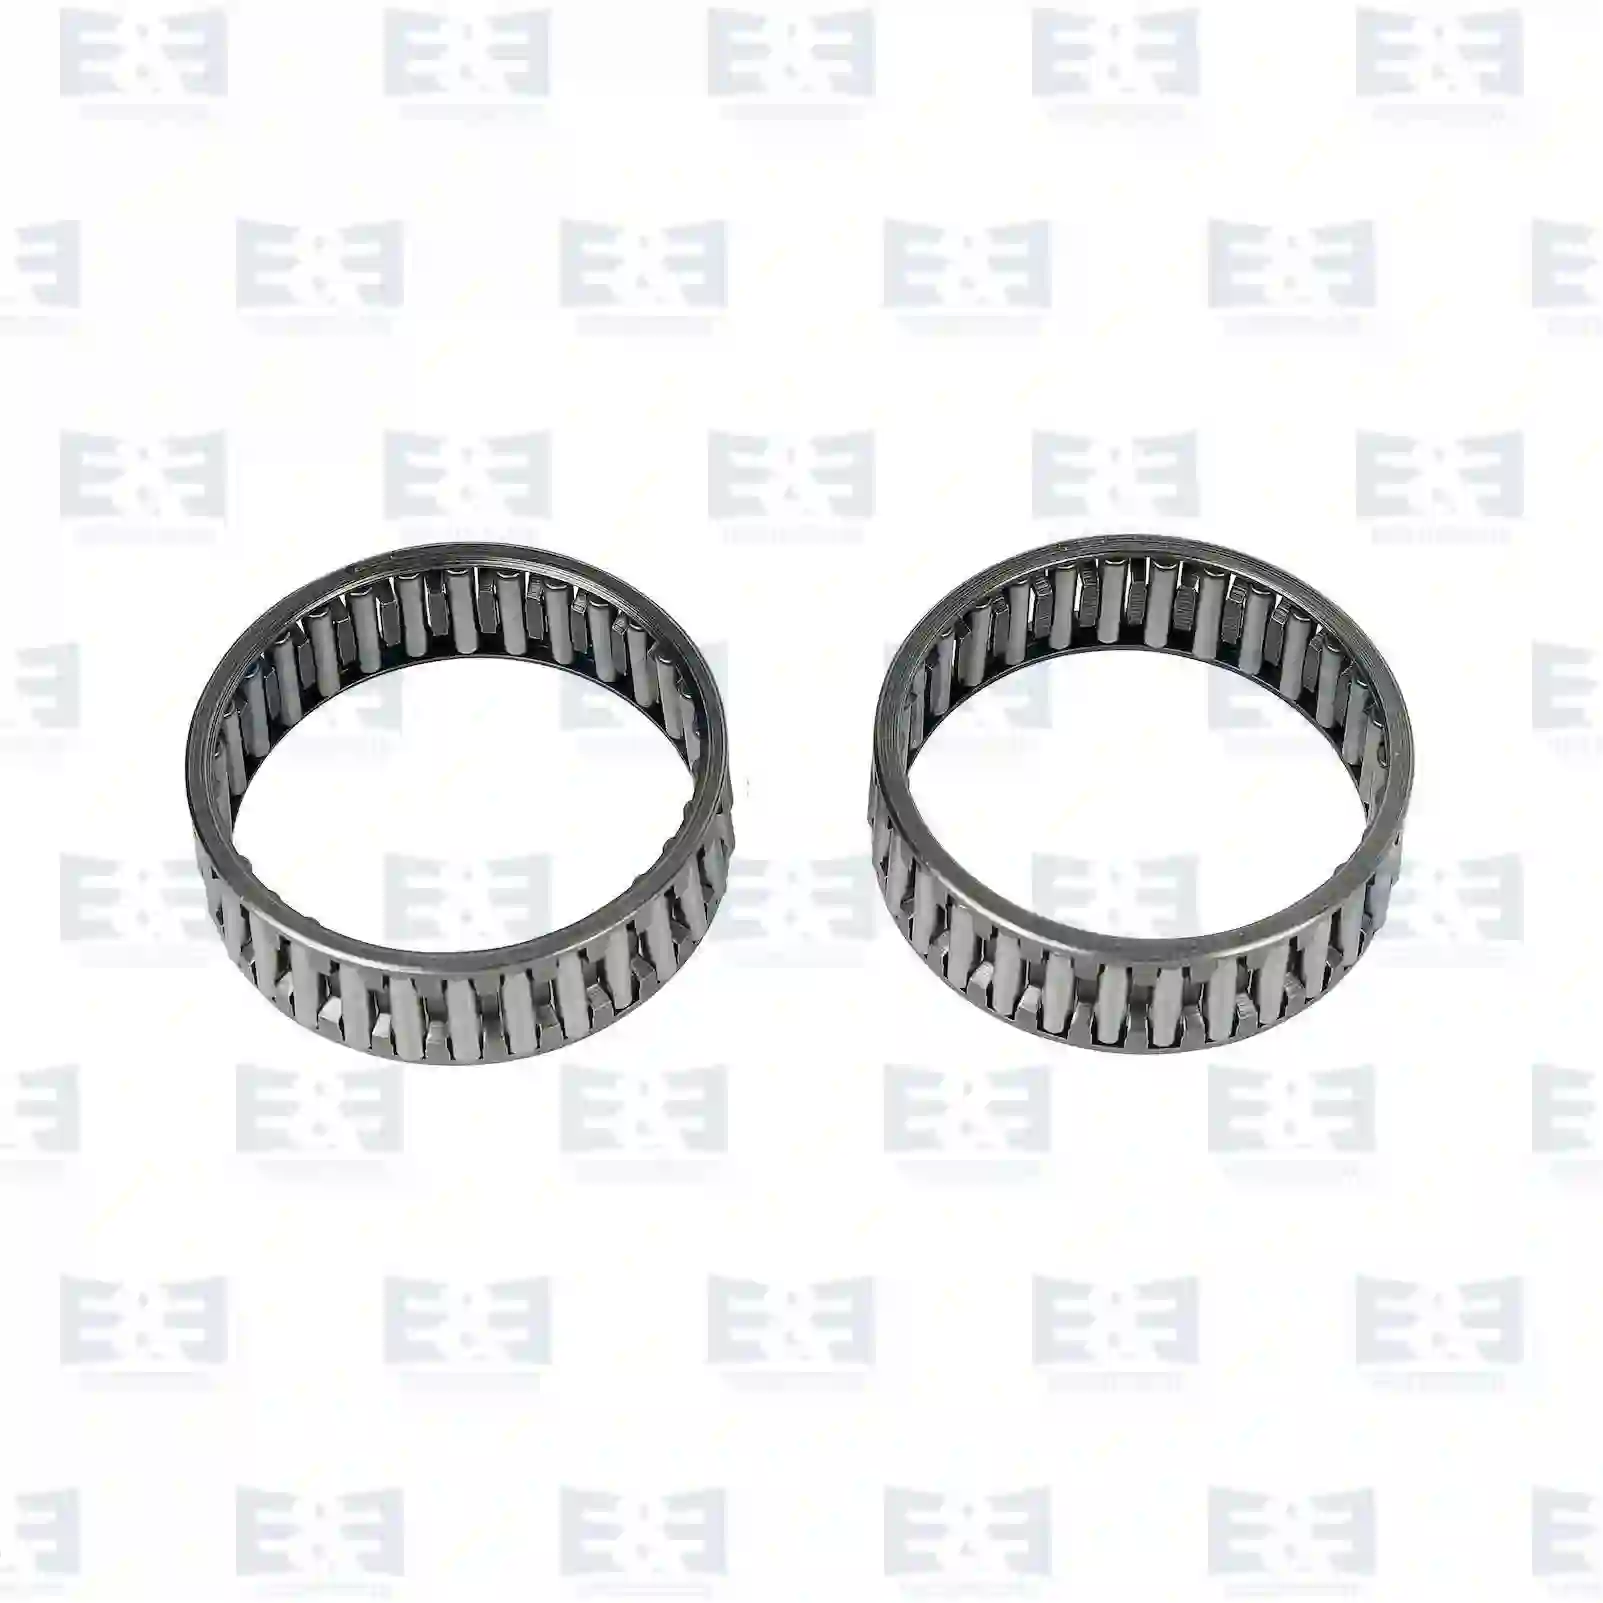  Needle bearing kit || E&E Truck Spare Parts | Truck Spare Parts, Auotomotive Spare Parts